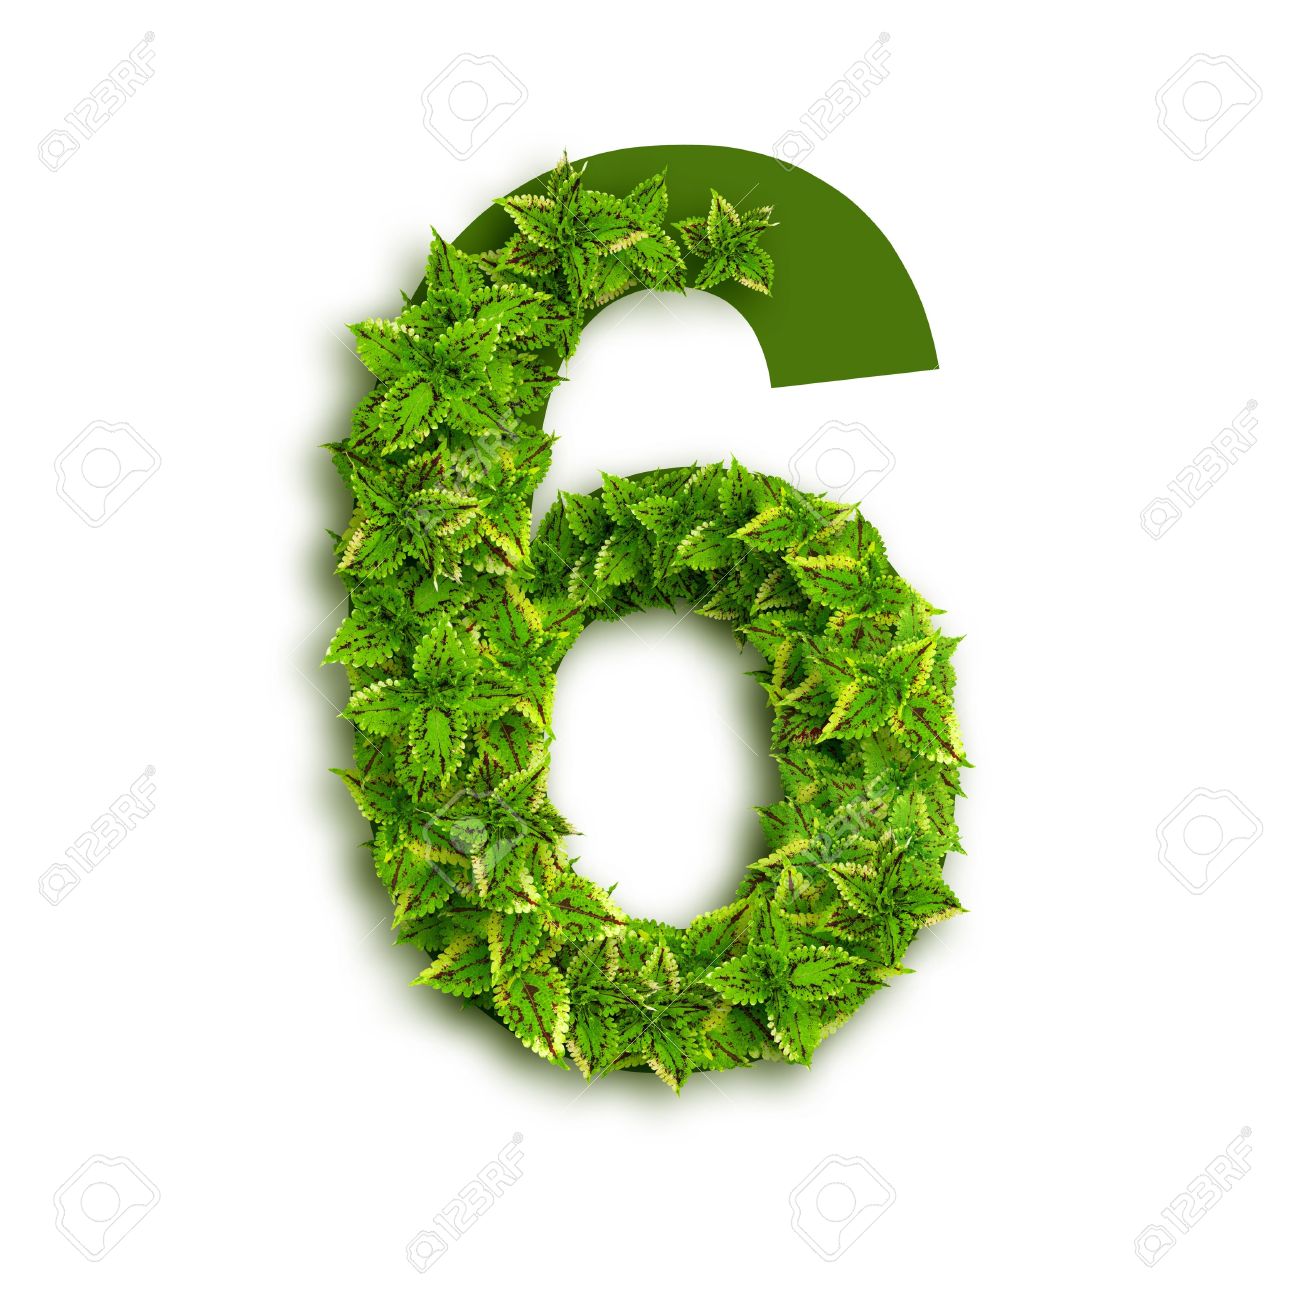 15402900-Number-6-alphabet-of-green-leaves-isolated-on-white-background--Stock-Photo.jpg